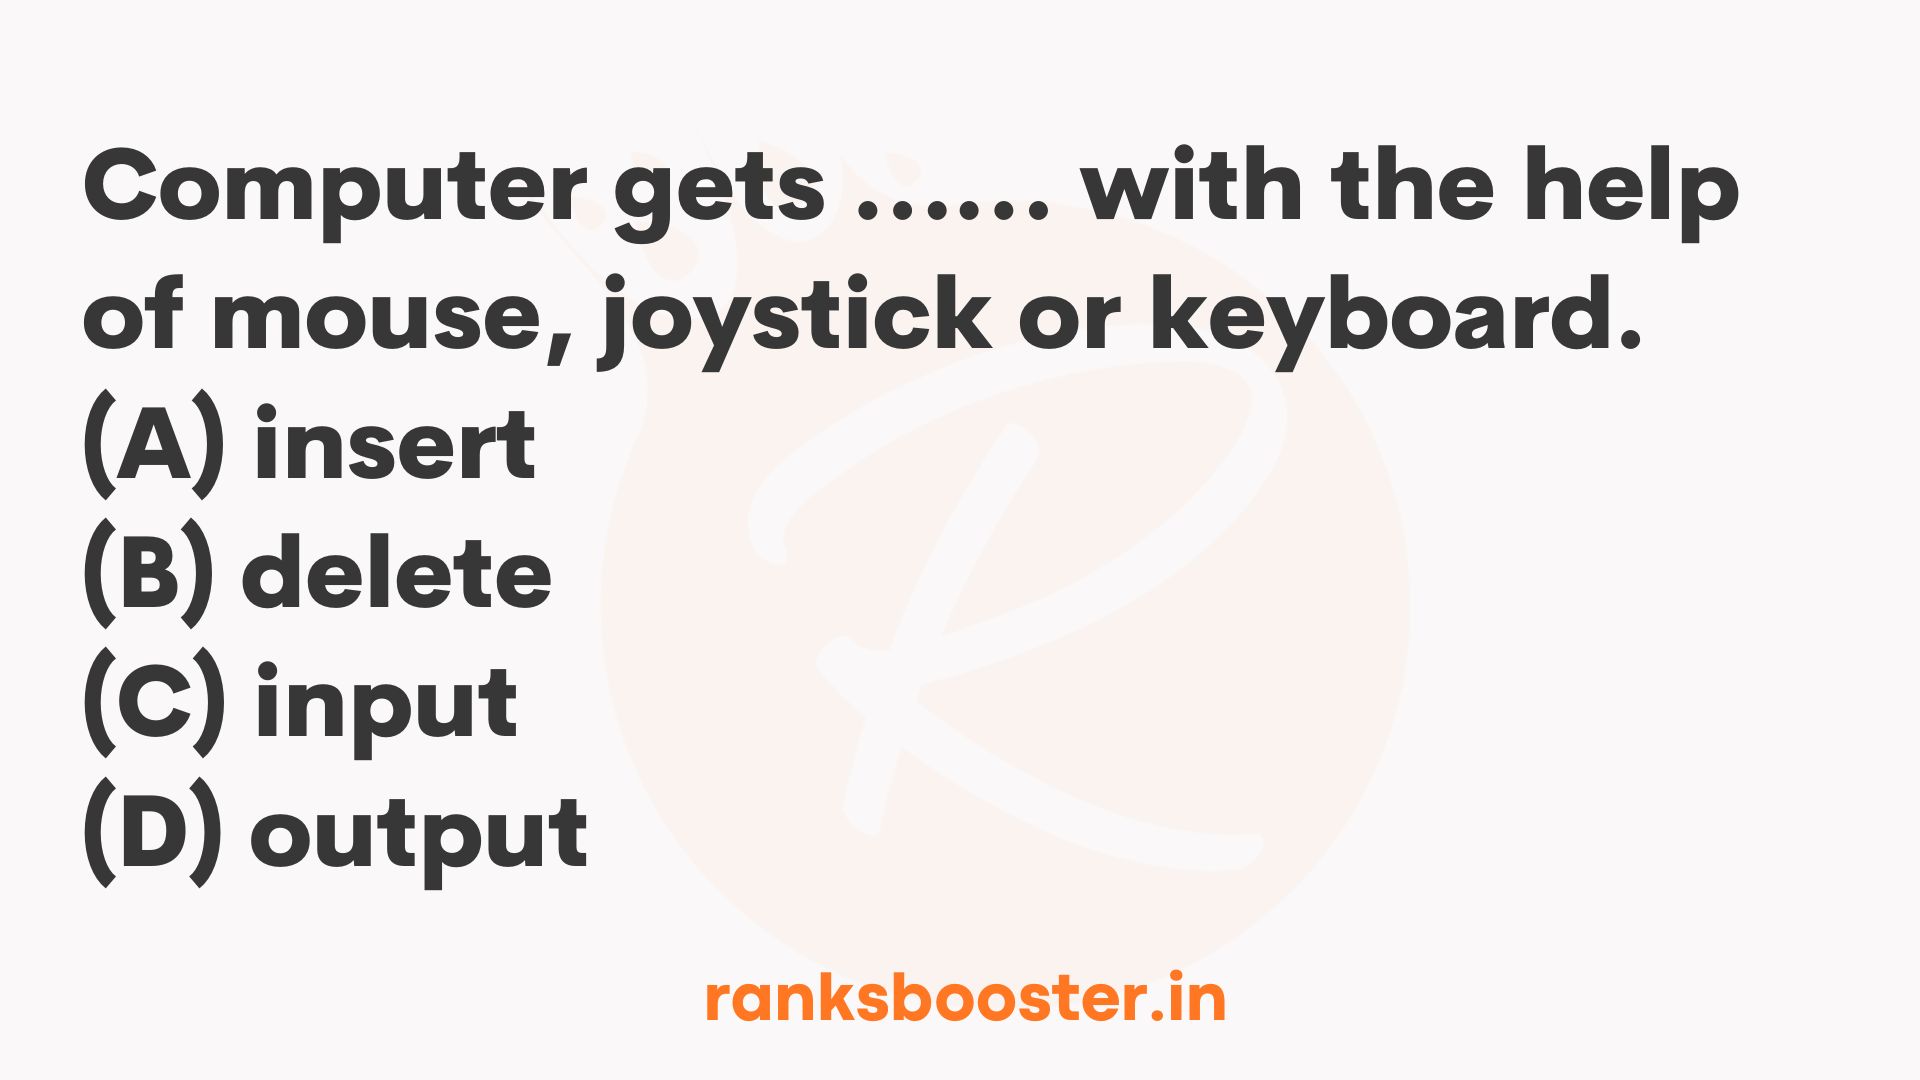 The computer gets …… with the help of mouse, joystick or keyboard. (A) insert (B) delete (C) input (D) output